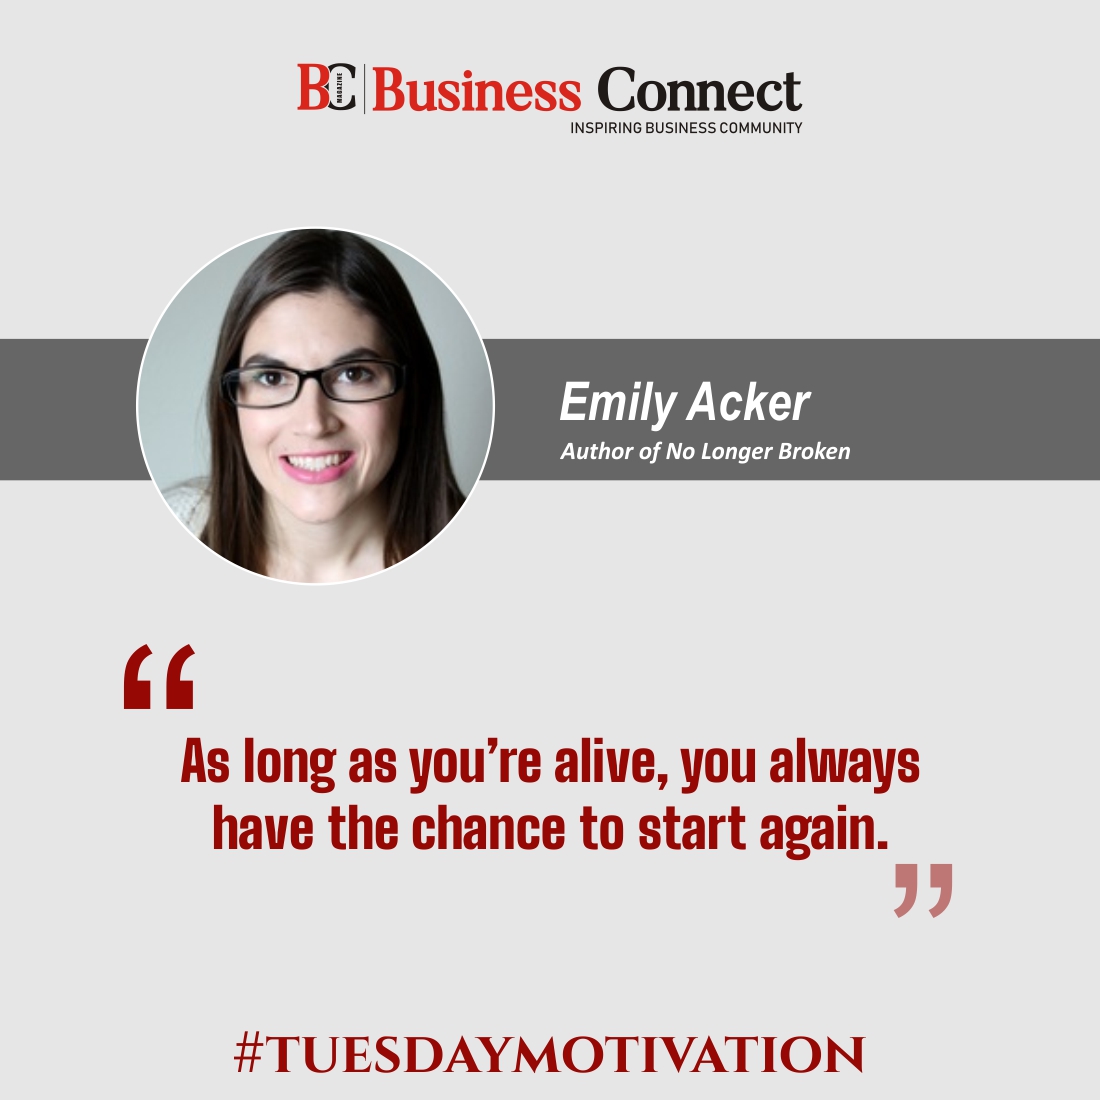 As long as you’re alive, you always have the chance to start again.-Emily Acker

#emilyacker #EmilyAckerquote #morningvibe #success #quotesoftheday #motivationdaily #positivevibes #positivequote #inspirationalquotes #dailymotivationalquotes #morningquotes